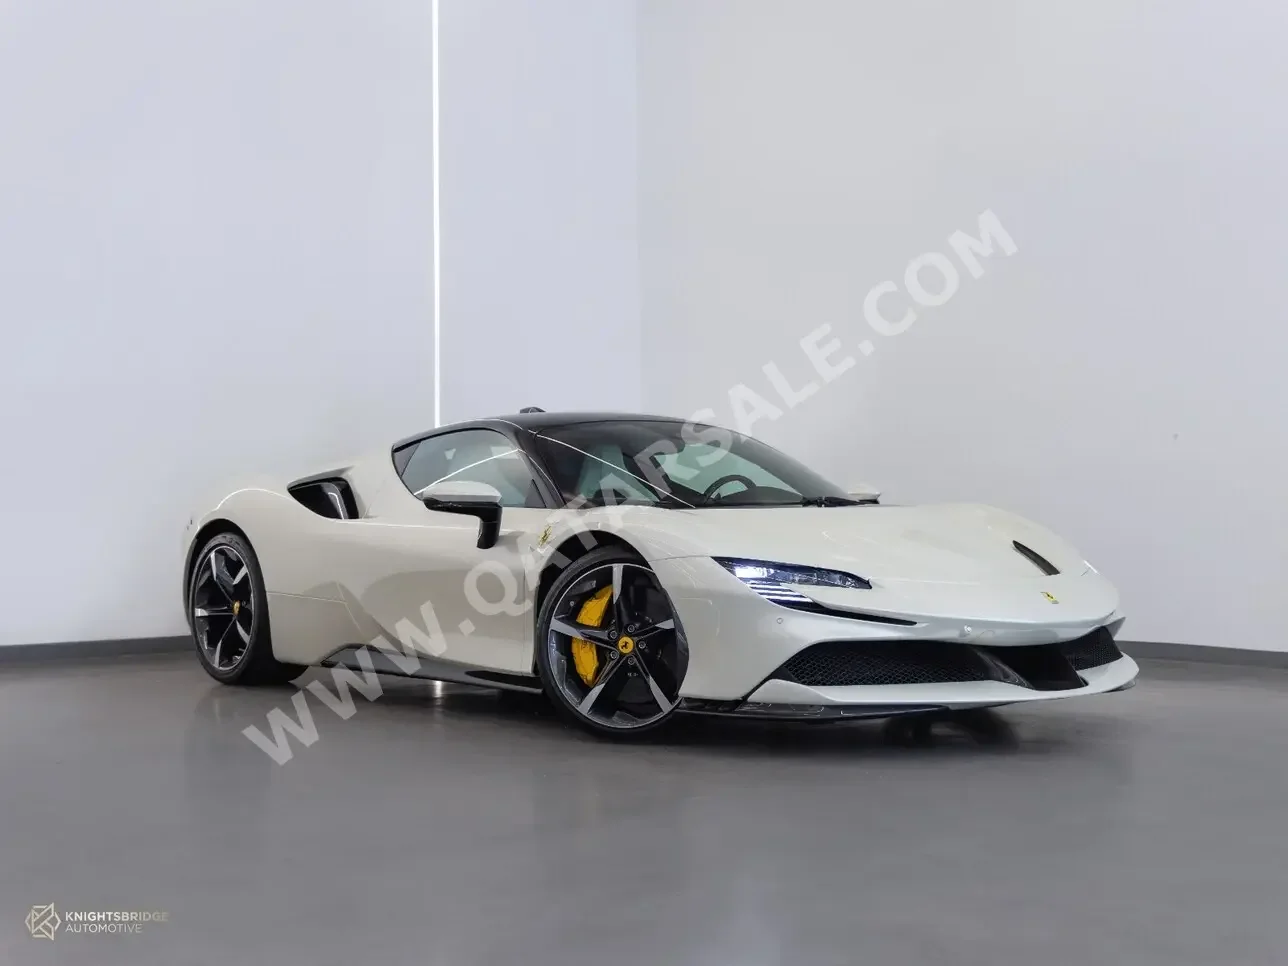 Ferrari  SF90 Stradale  2021  Automatic  1,200 Km  8 Cylinder  Rear Wheel Drive (RWD)  Coupe / Sport  White  With Warranty